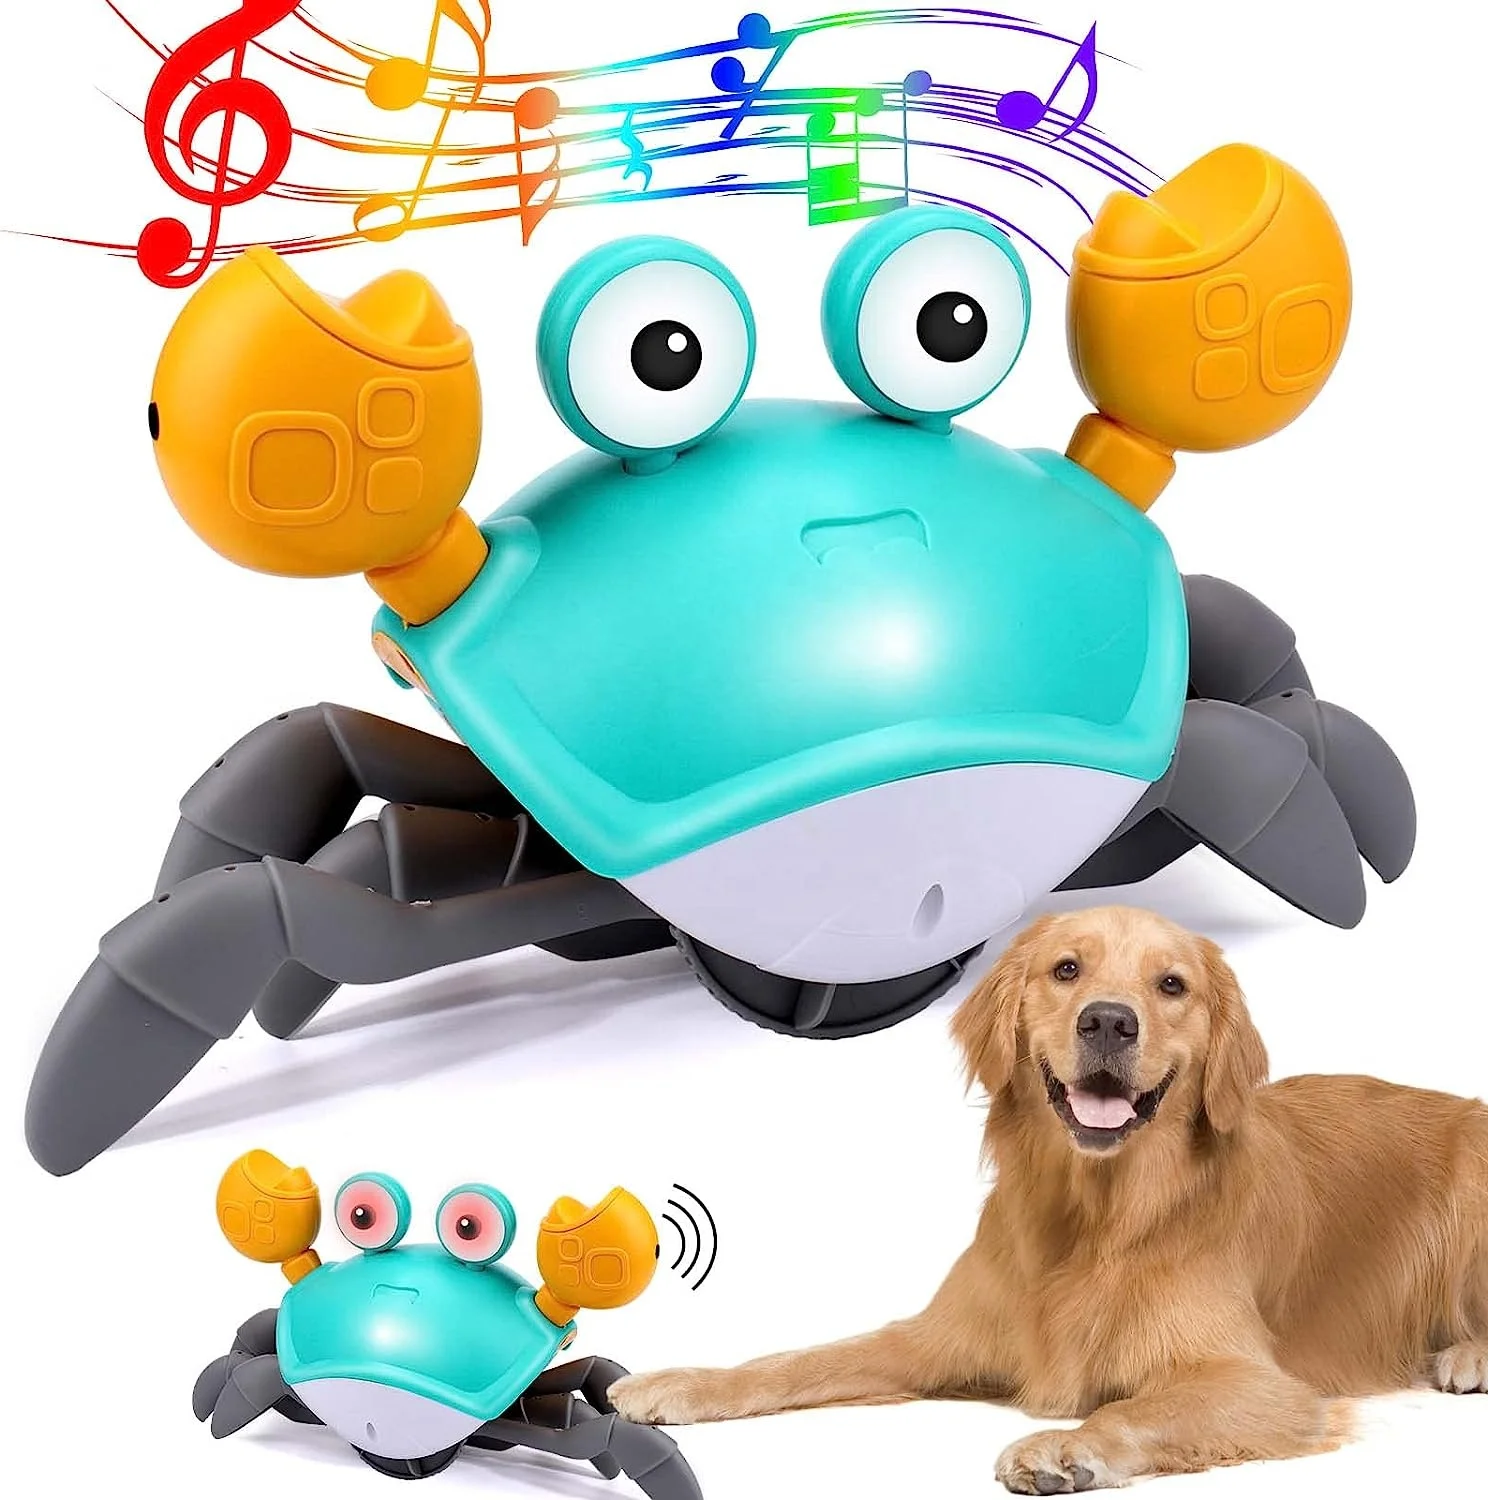 

Creative Intelligent Escaping Crab Dog Toy with Obstacle Avoidance Sensor Crawling Crab Toys For Dogs Cats Pets Toy